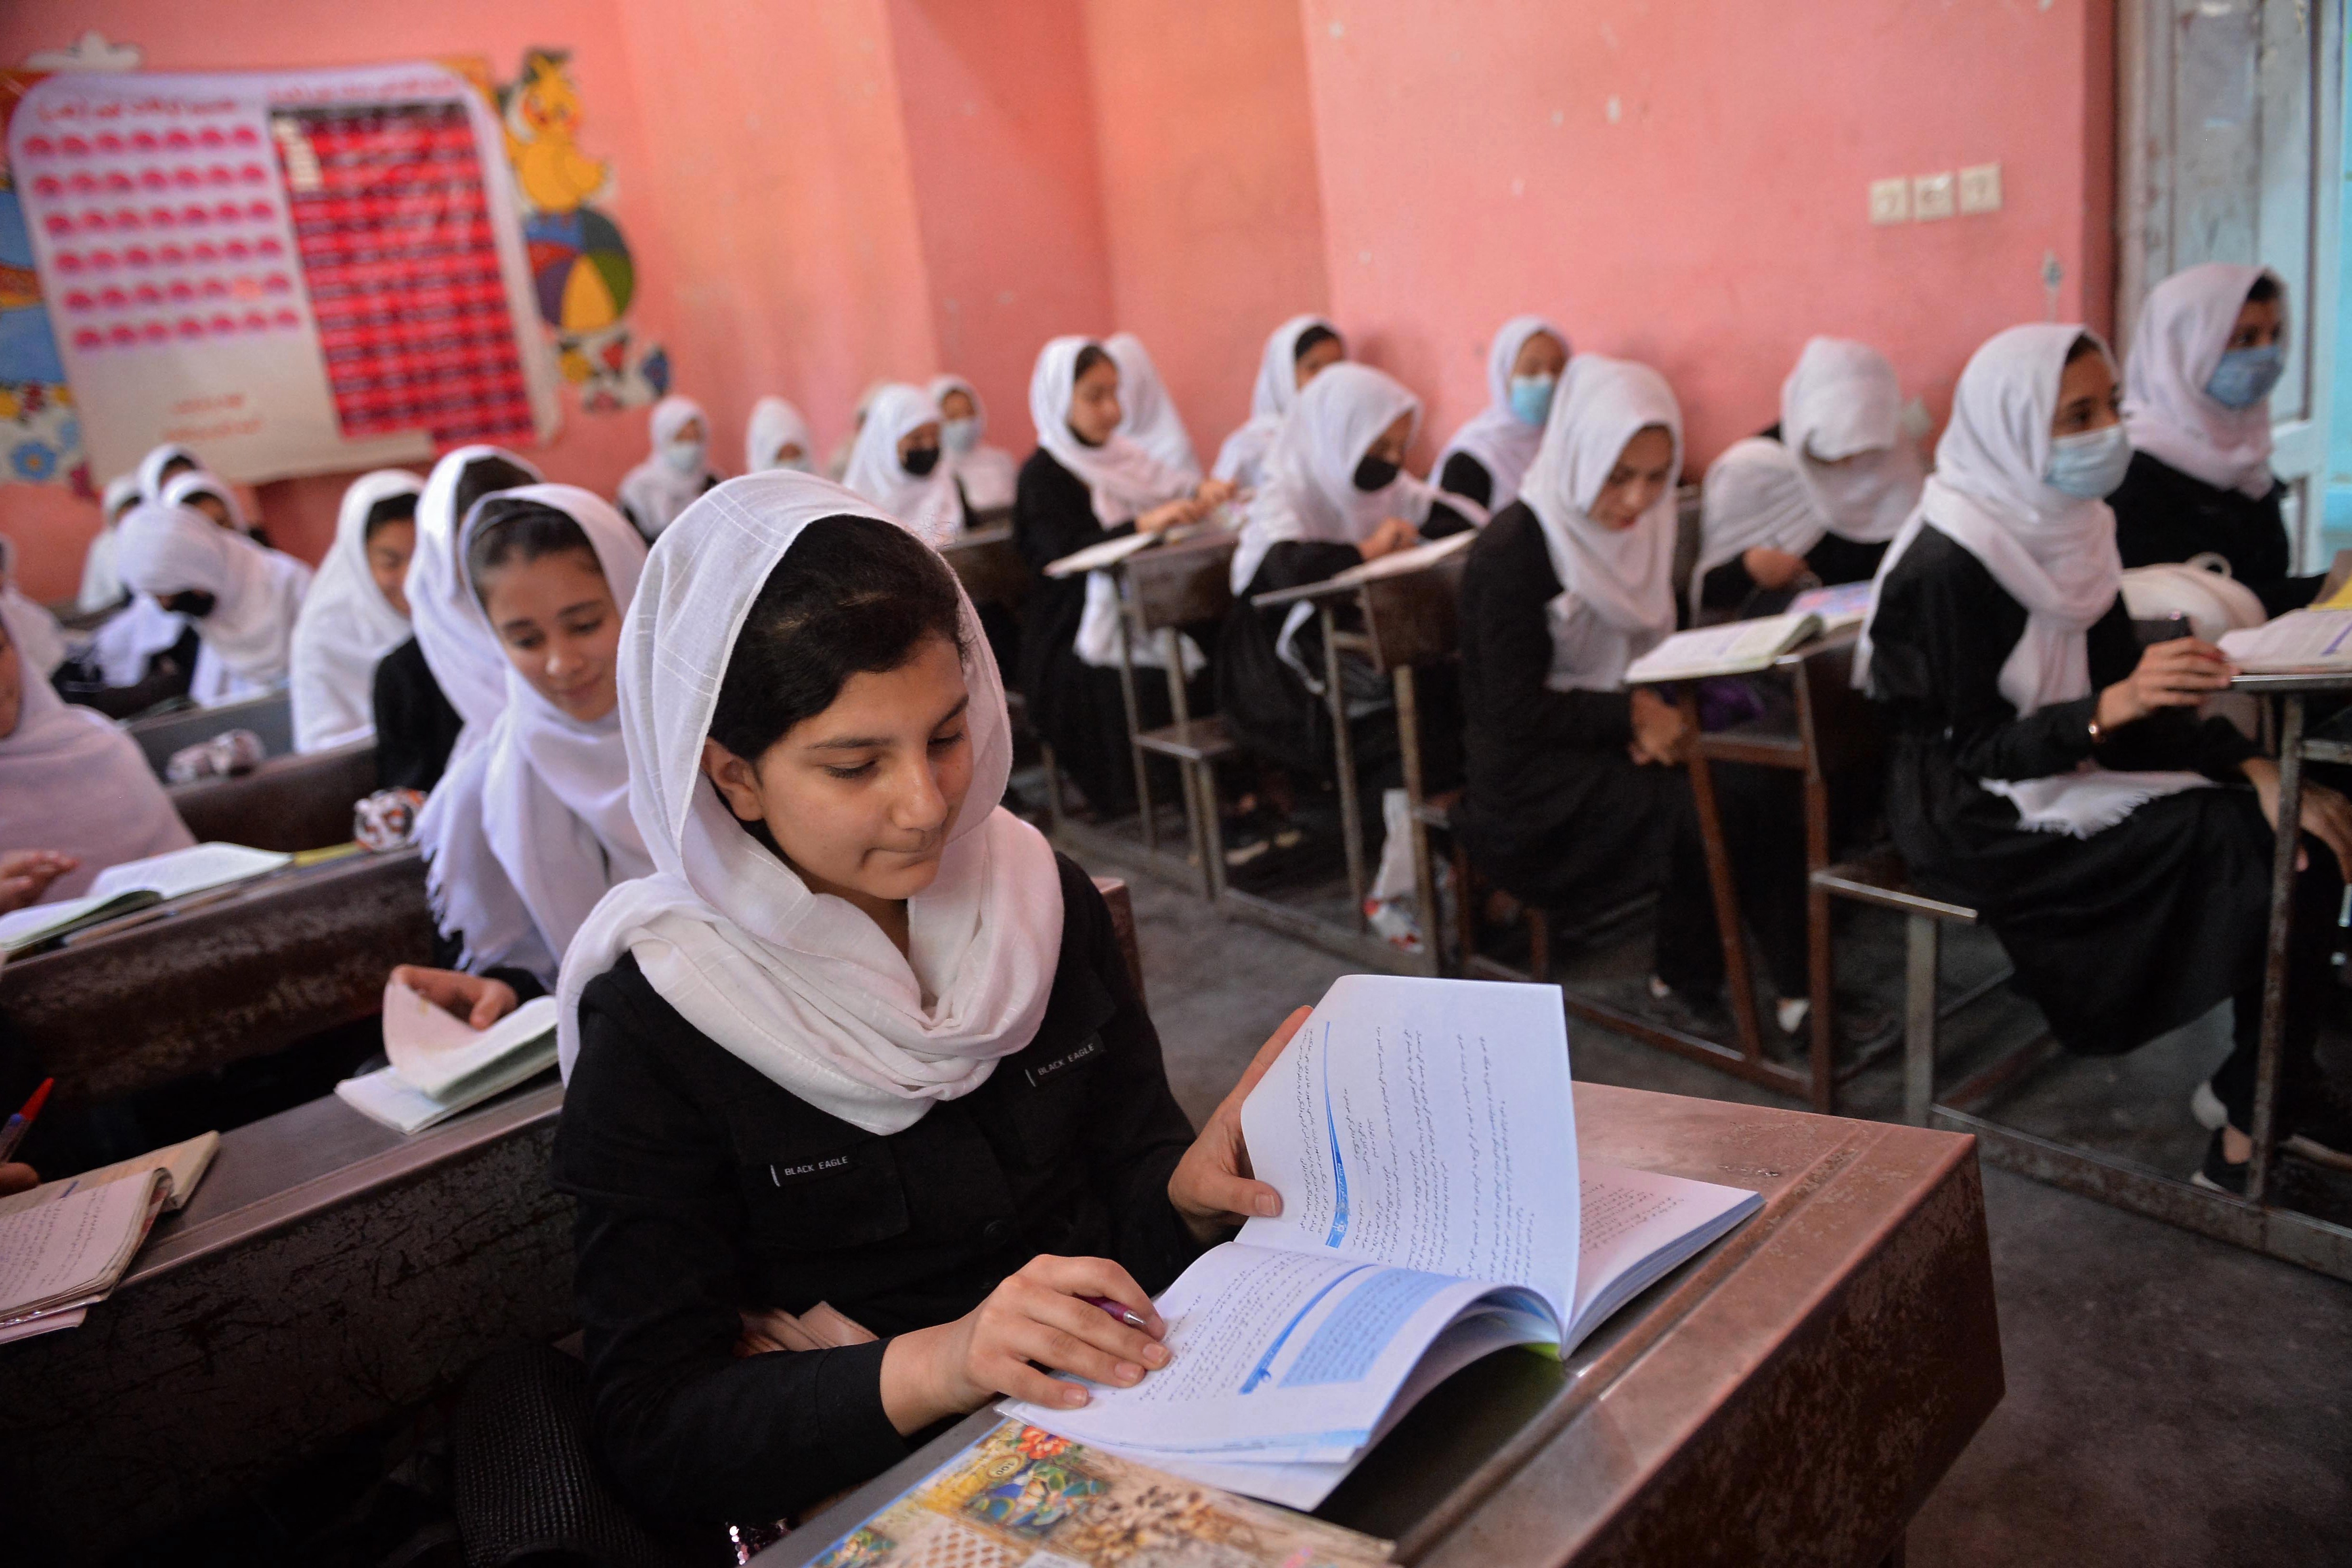 Girls attend their class at a school in Herat, Afghanistan on May 9, 2021 (AFP)